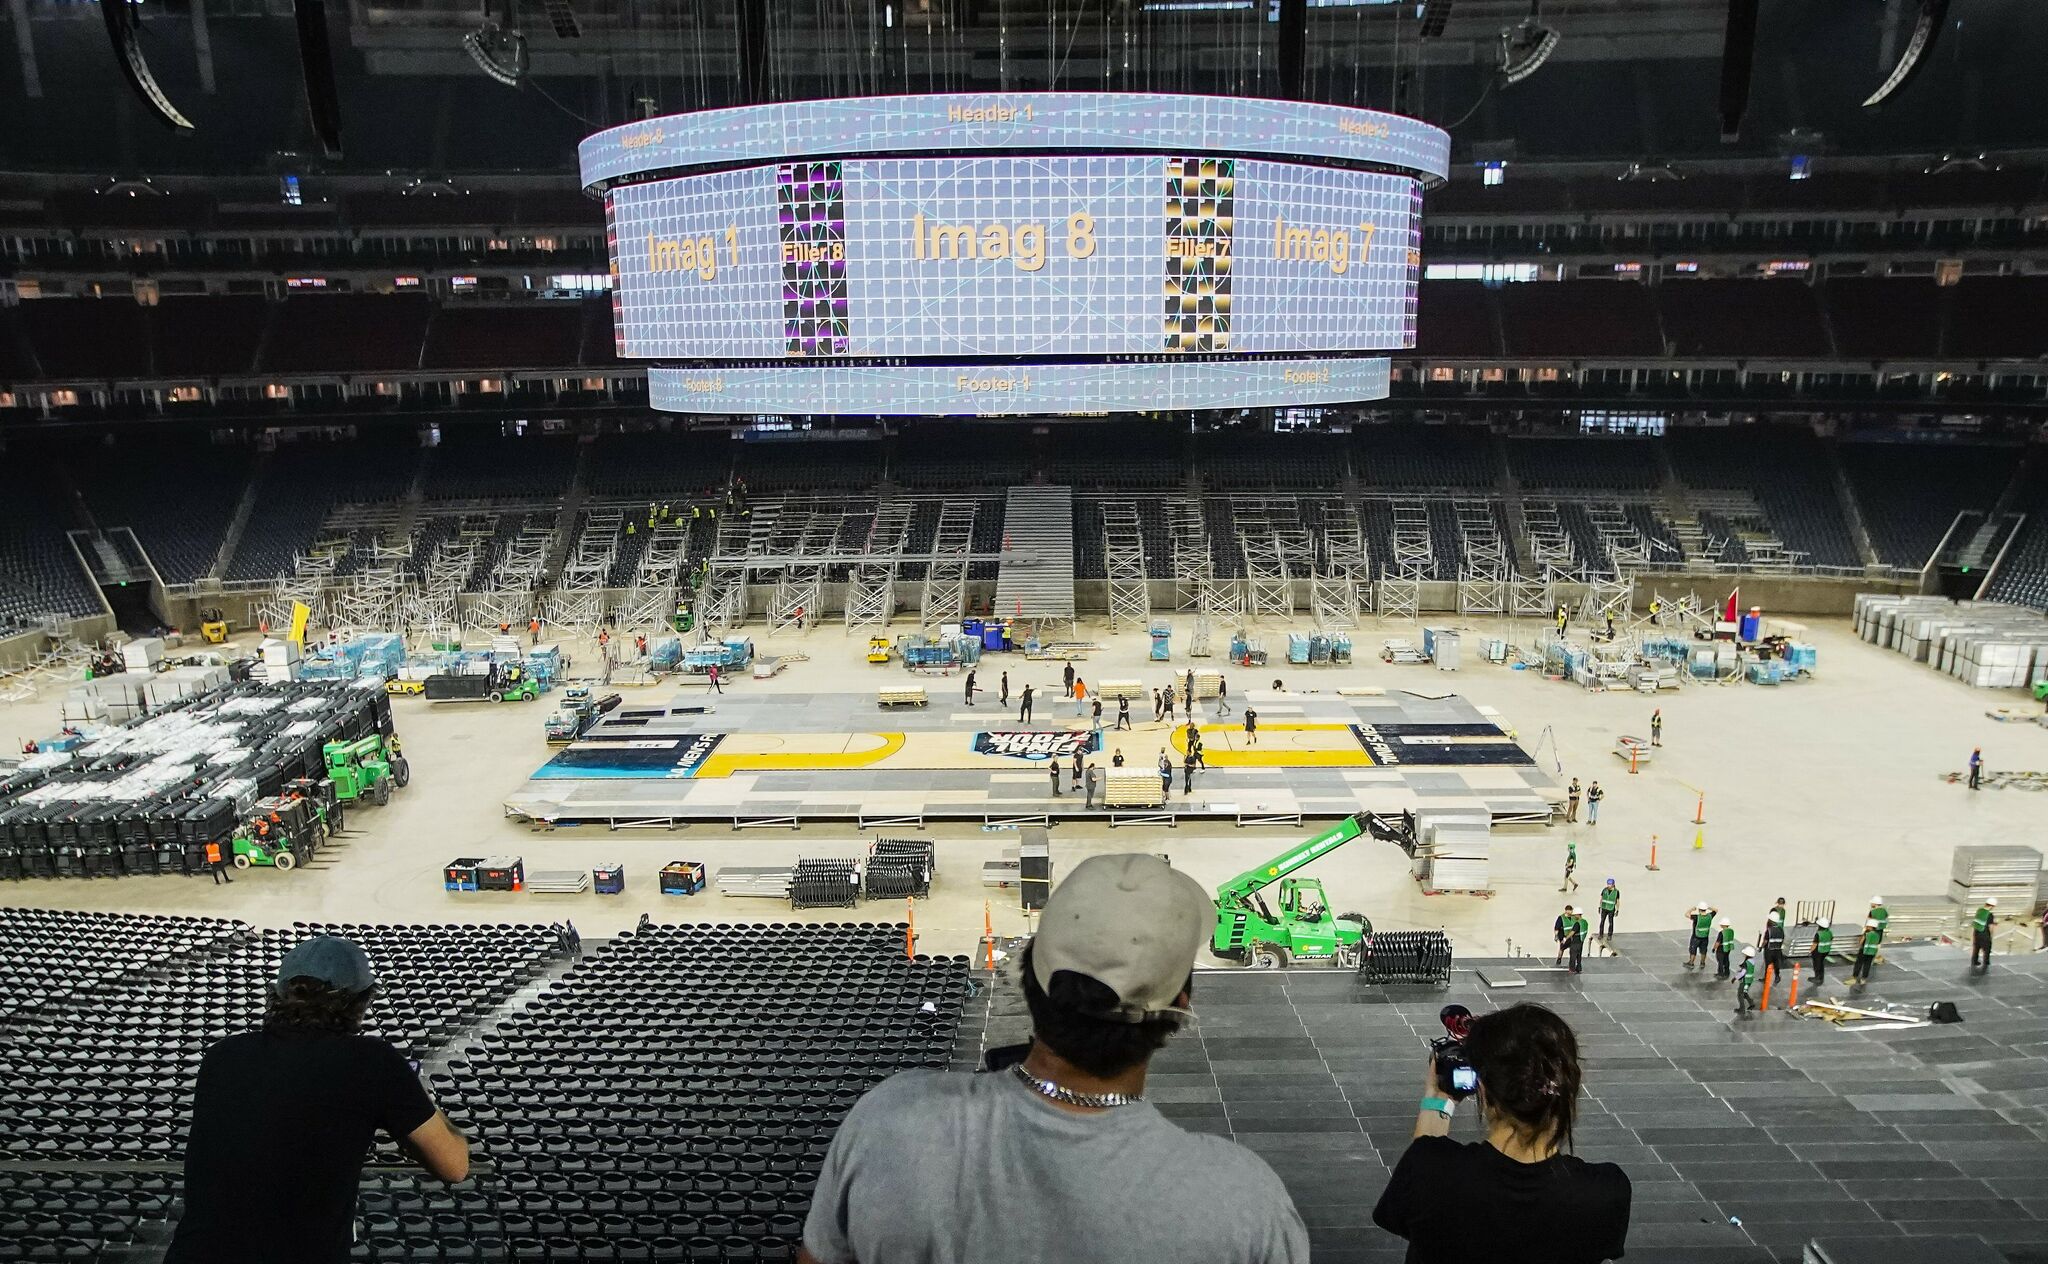 Watch Houstons NRG Stadium morph from Rodeo to Final Four